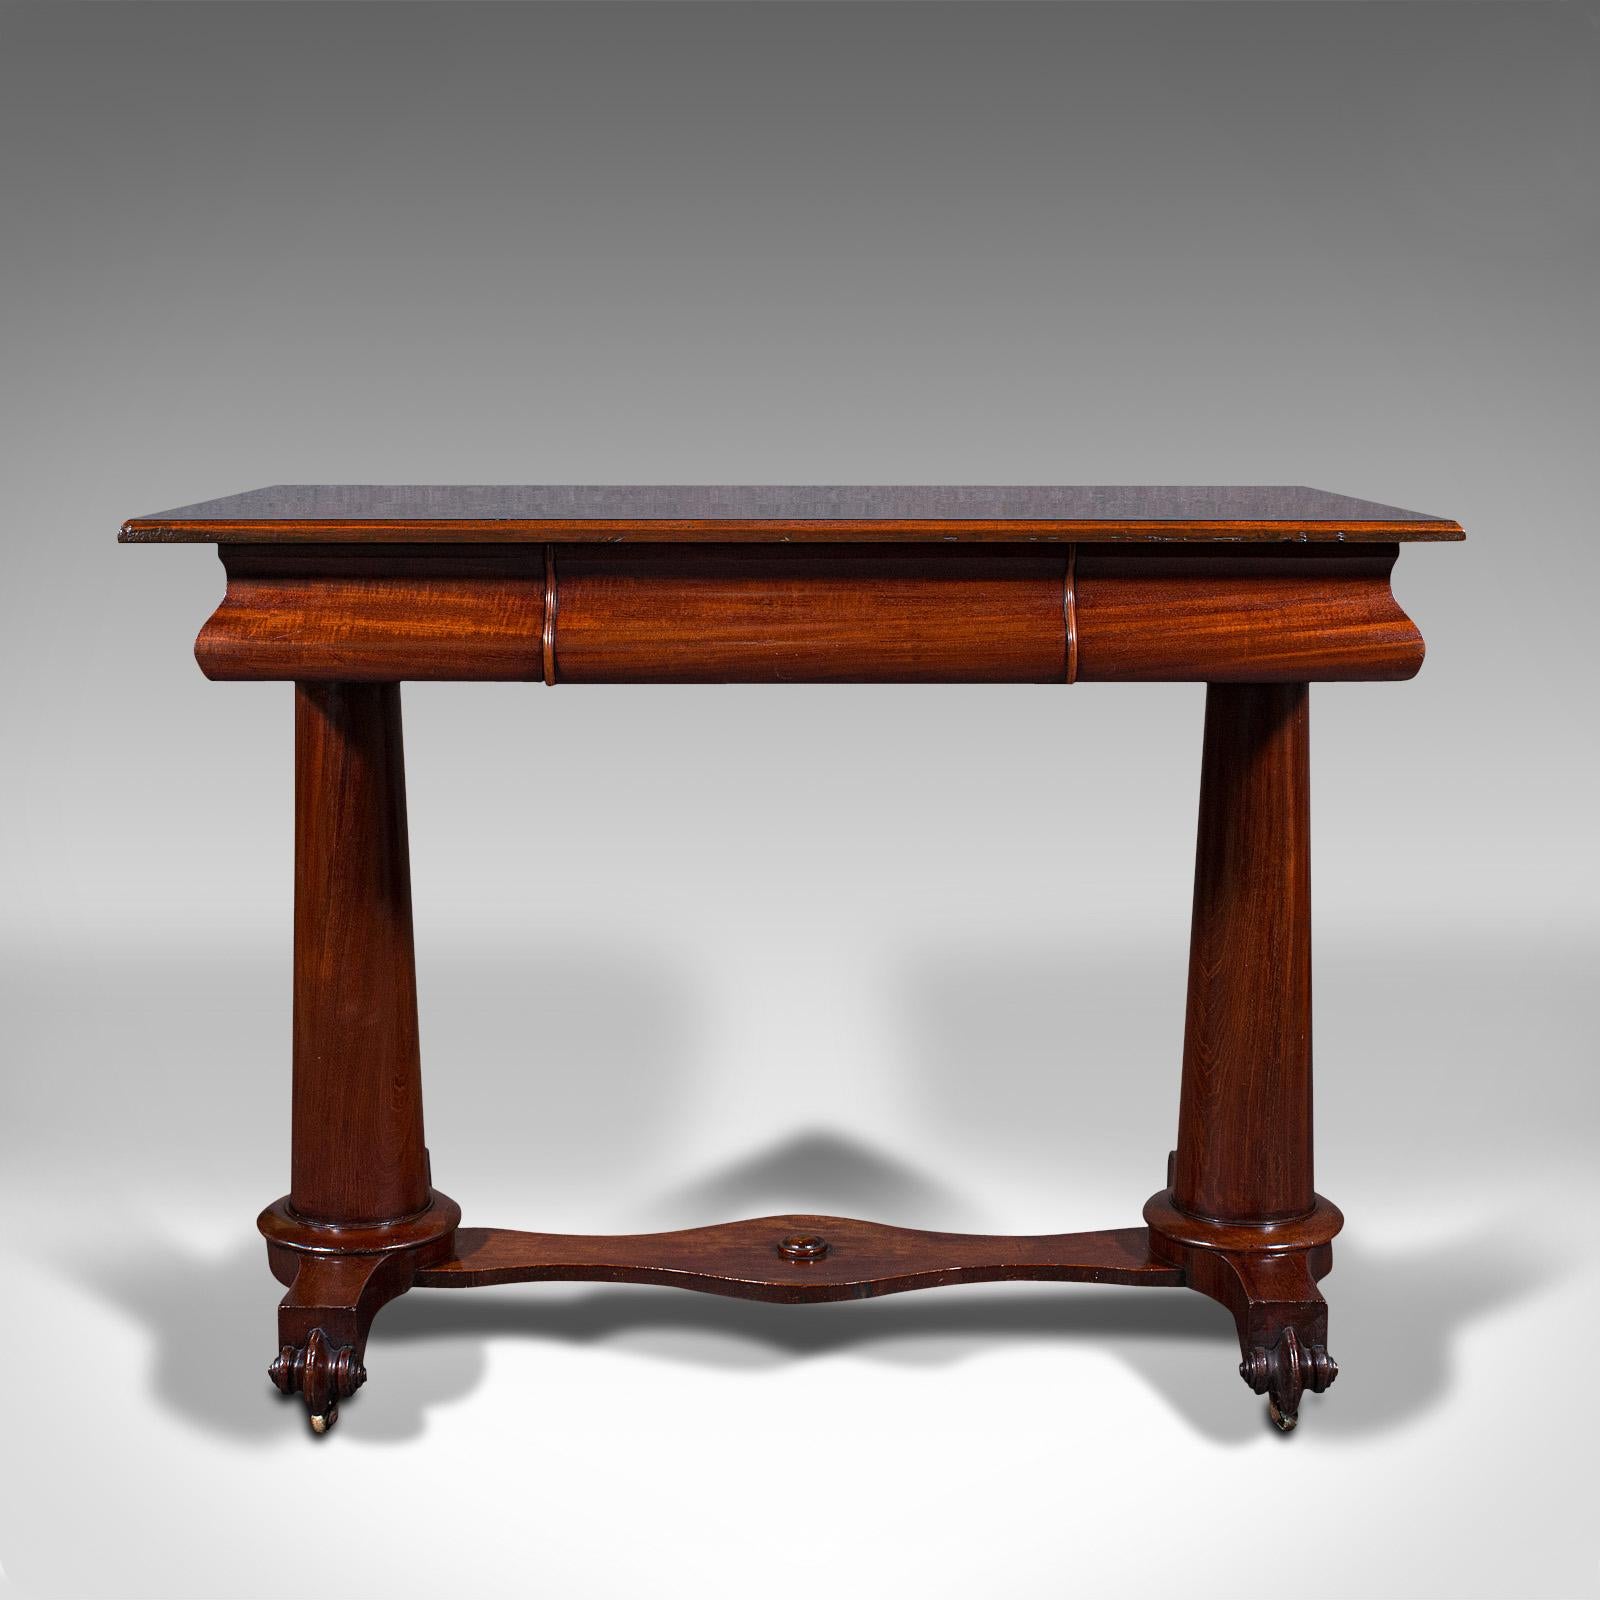 This is an antique console table. An English, rosewood and mahogany side or occasional table, dating to the Regency period, circa 1820.

Of superior, striking craftsmanship and finish
Displays a desirable aged patina throughout
Select stocks